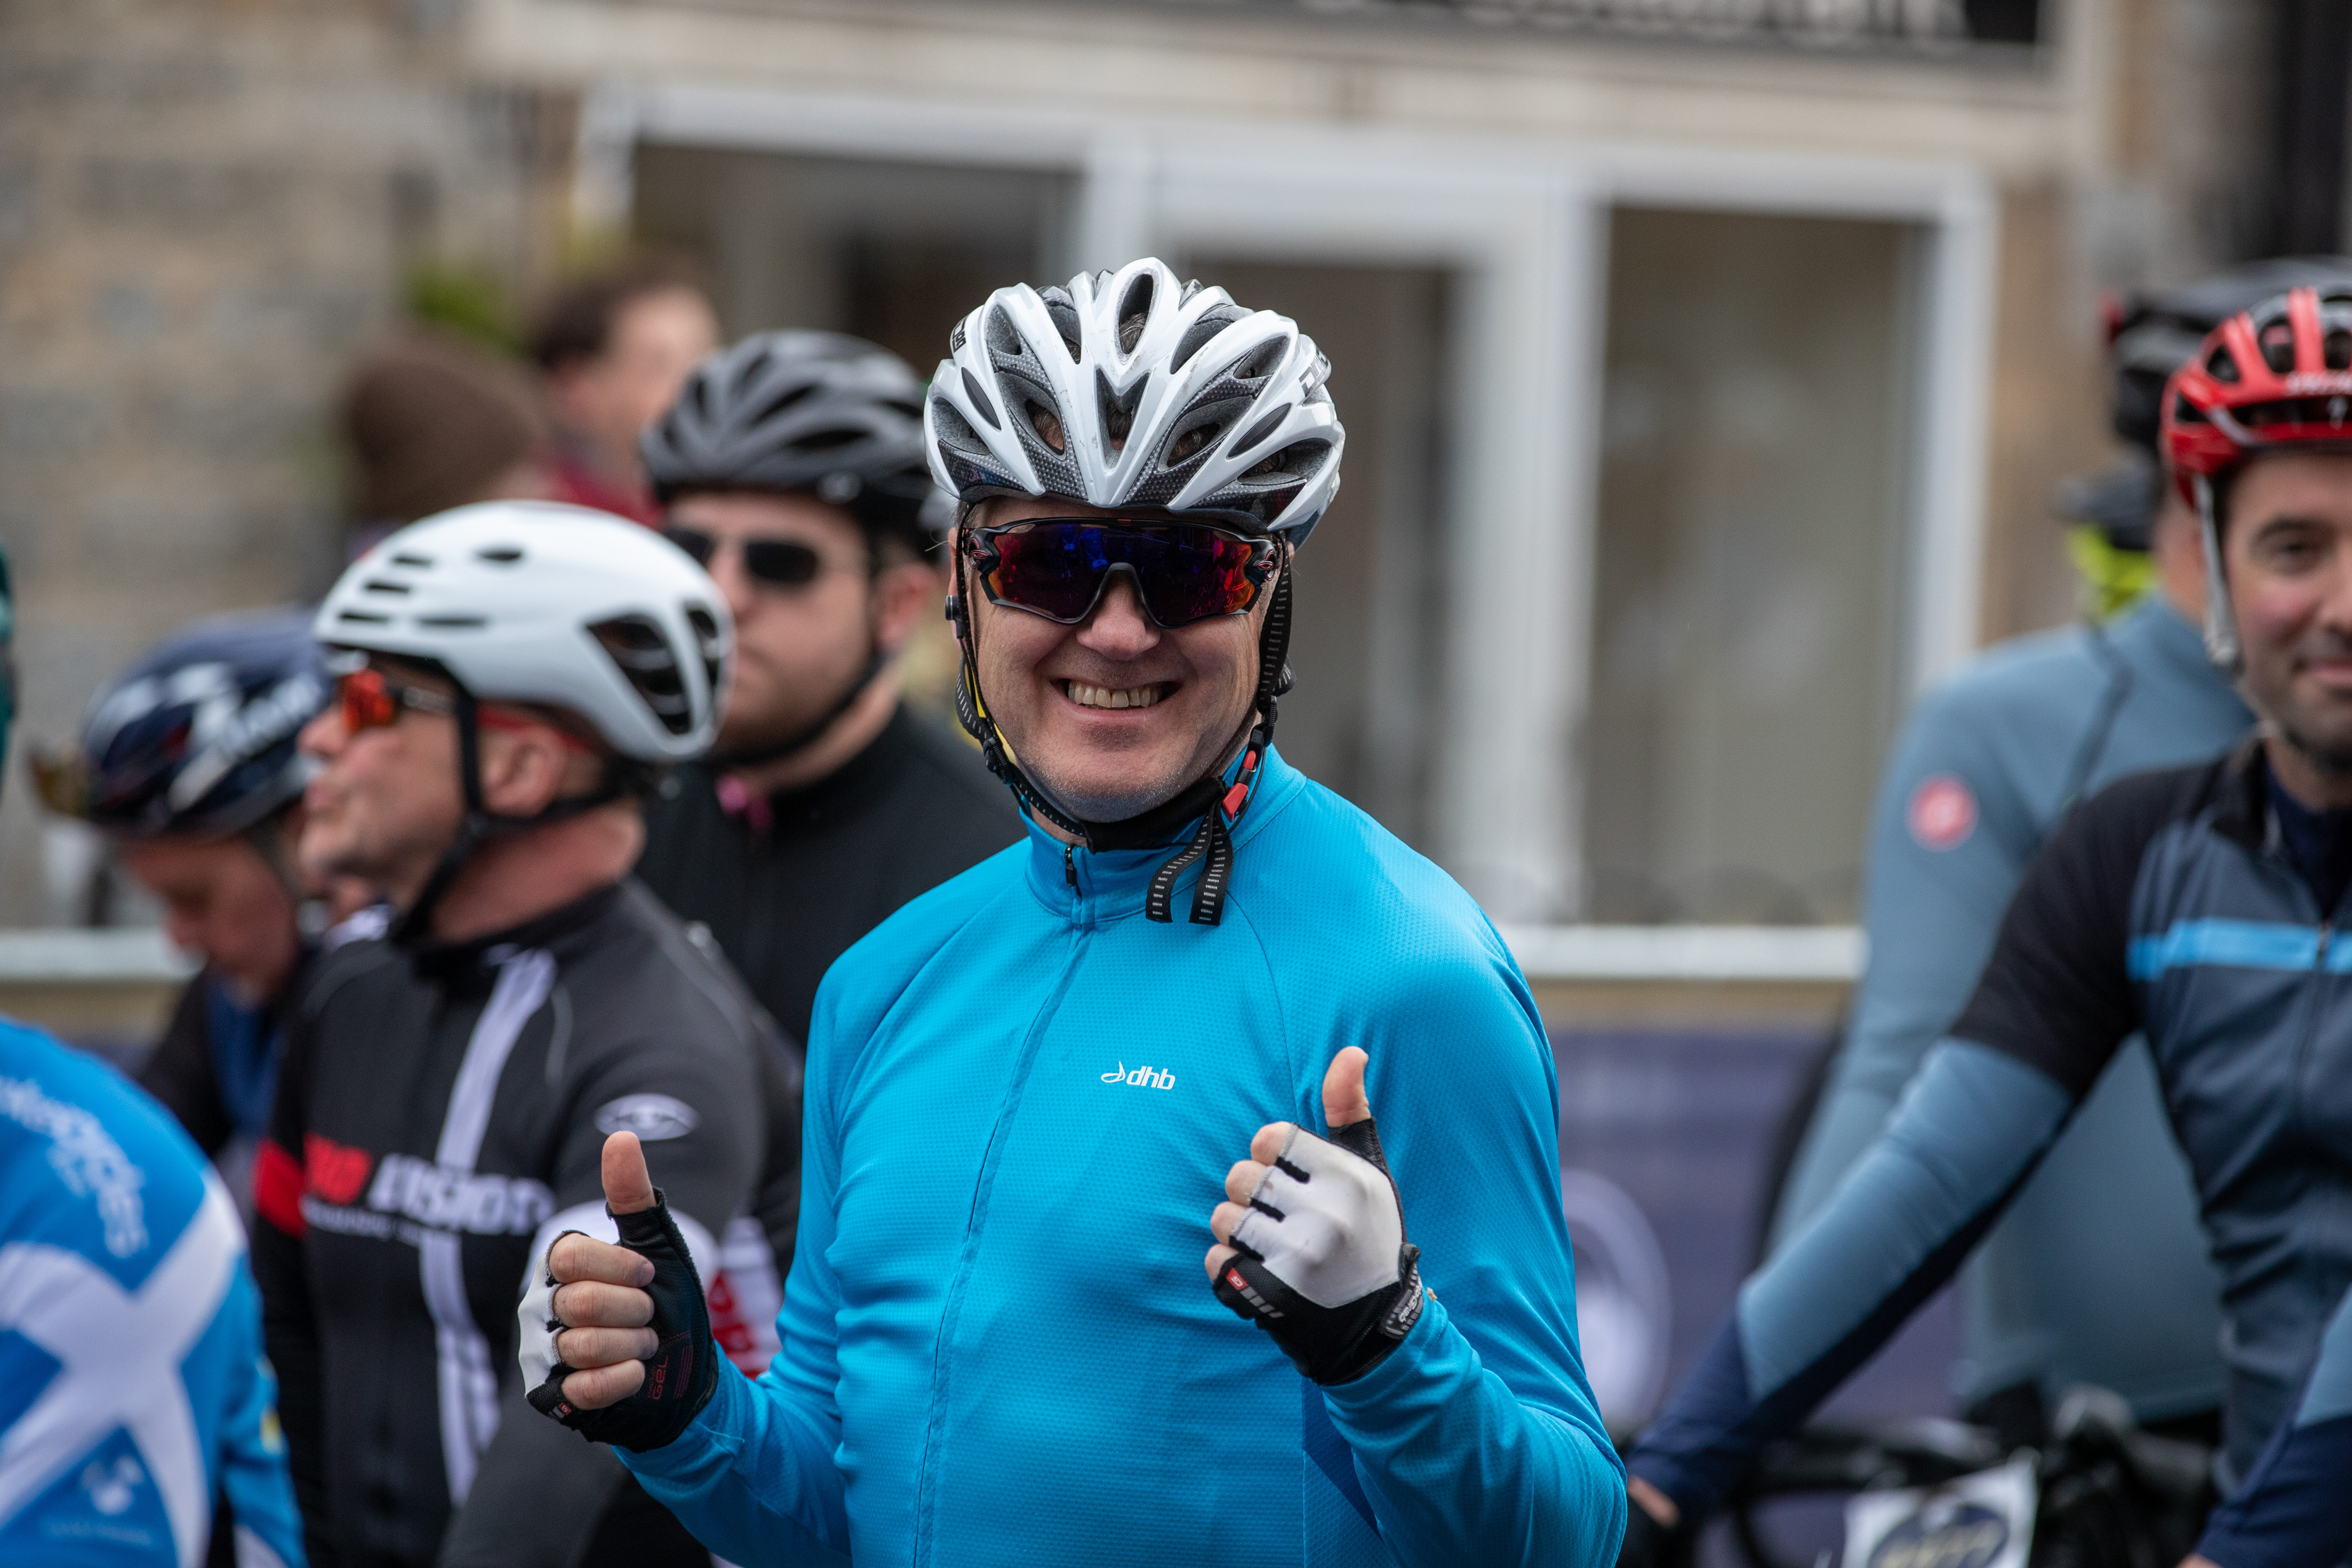 Hundreds of cyclists take part in Etape Caledonia